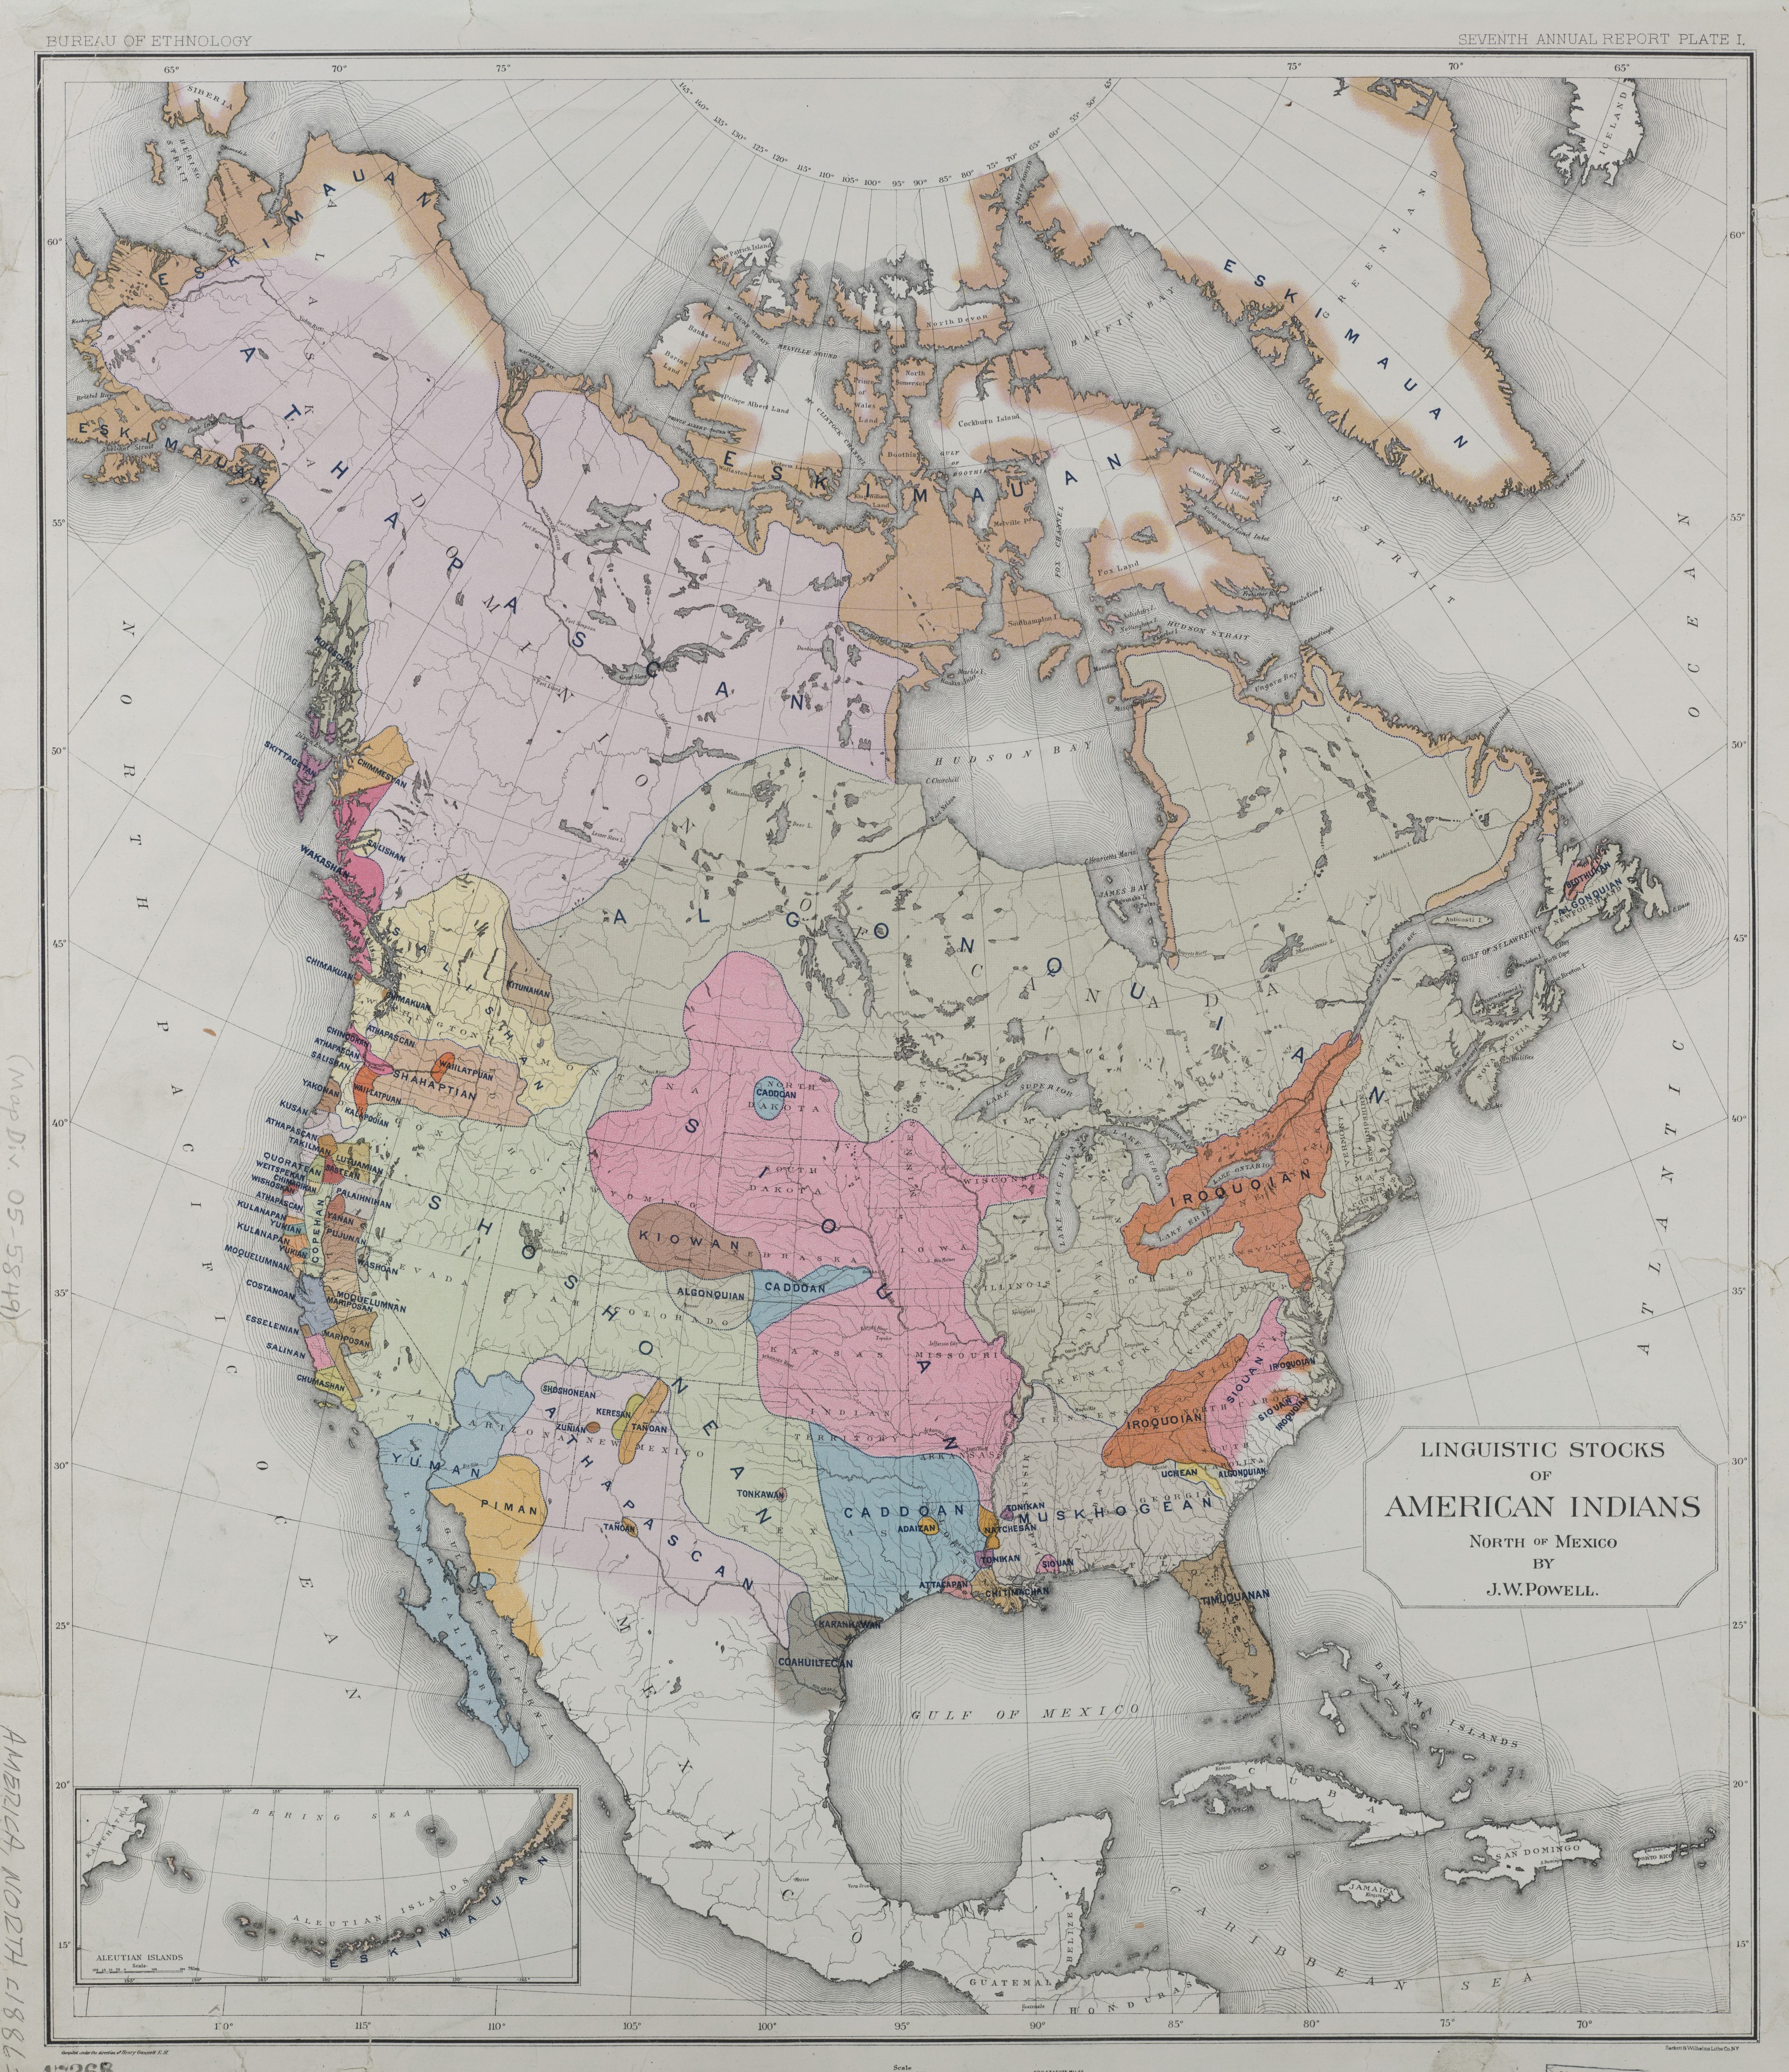 An early map of the continental United States with several bright colors depicting indigenous linguistic regions of the late 1800s. The map reads 